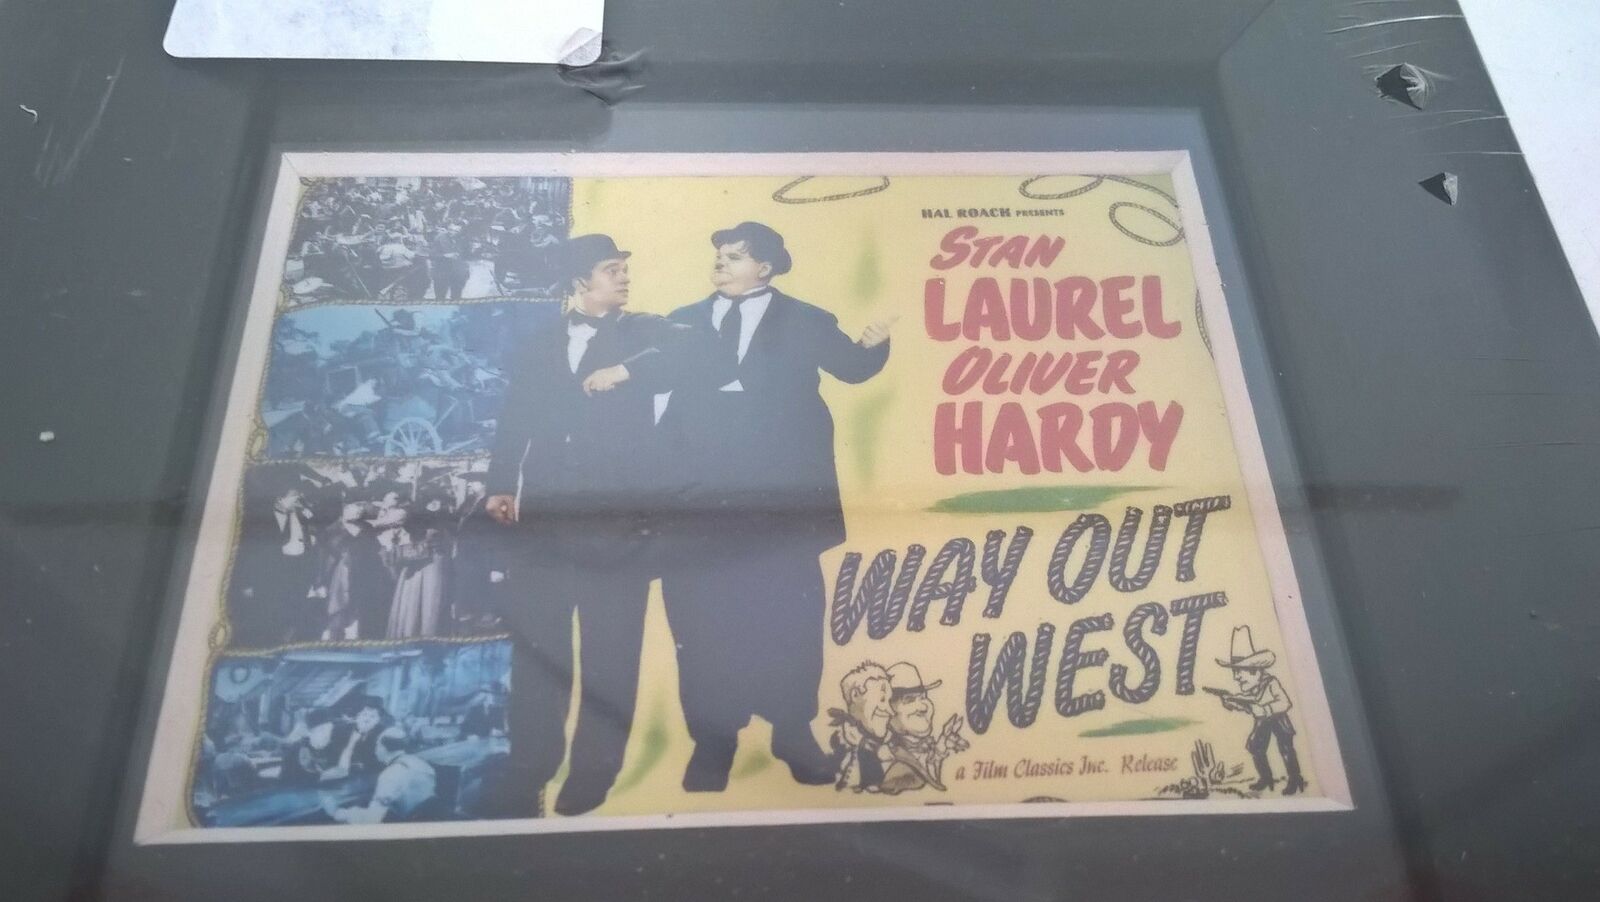 Laurel & Hardy Film Cell Memorabilia Way Out West - Image 2 of 6